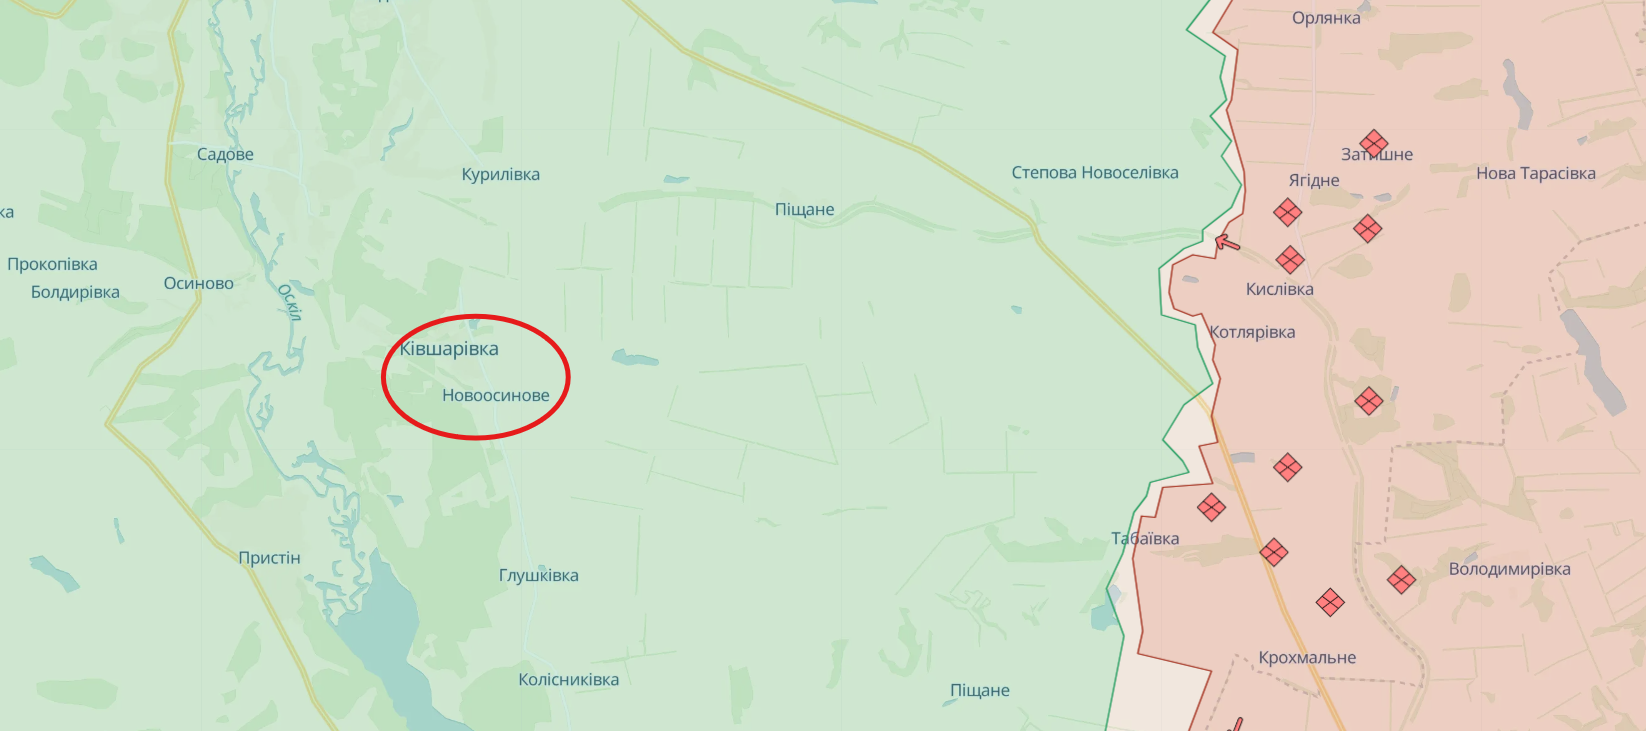 Russian army strikes at Kupyansk district in Kharkiv region: 5 killed, 9 wounded